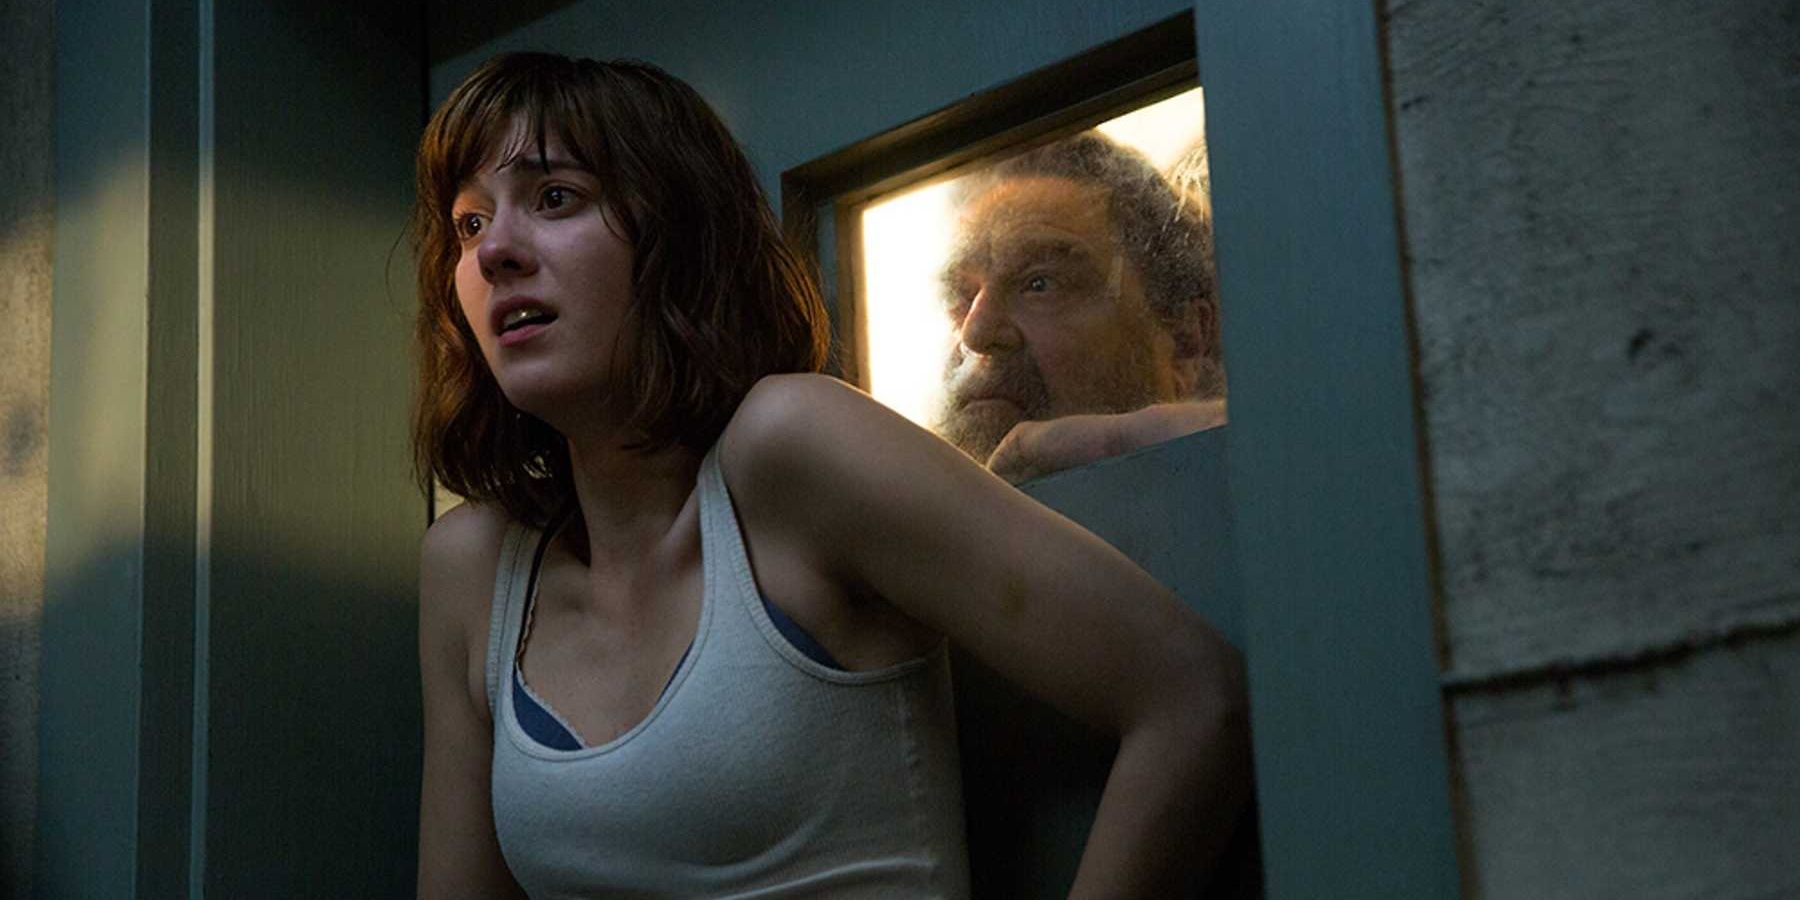 Michelle against a closed door in 10 Cloverfield Lane.